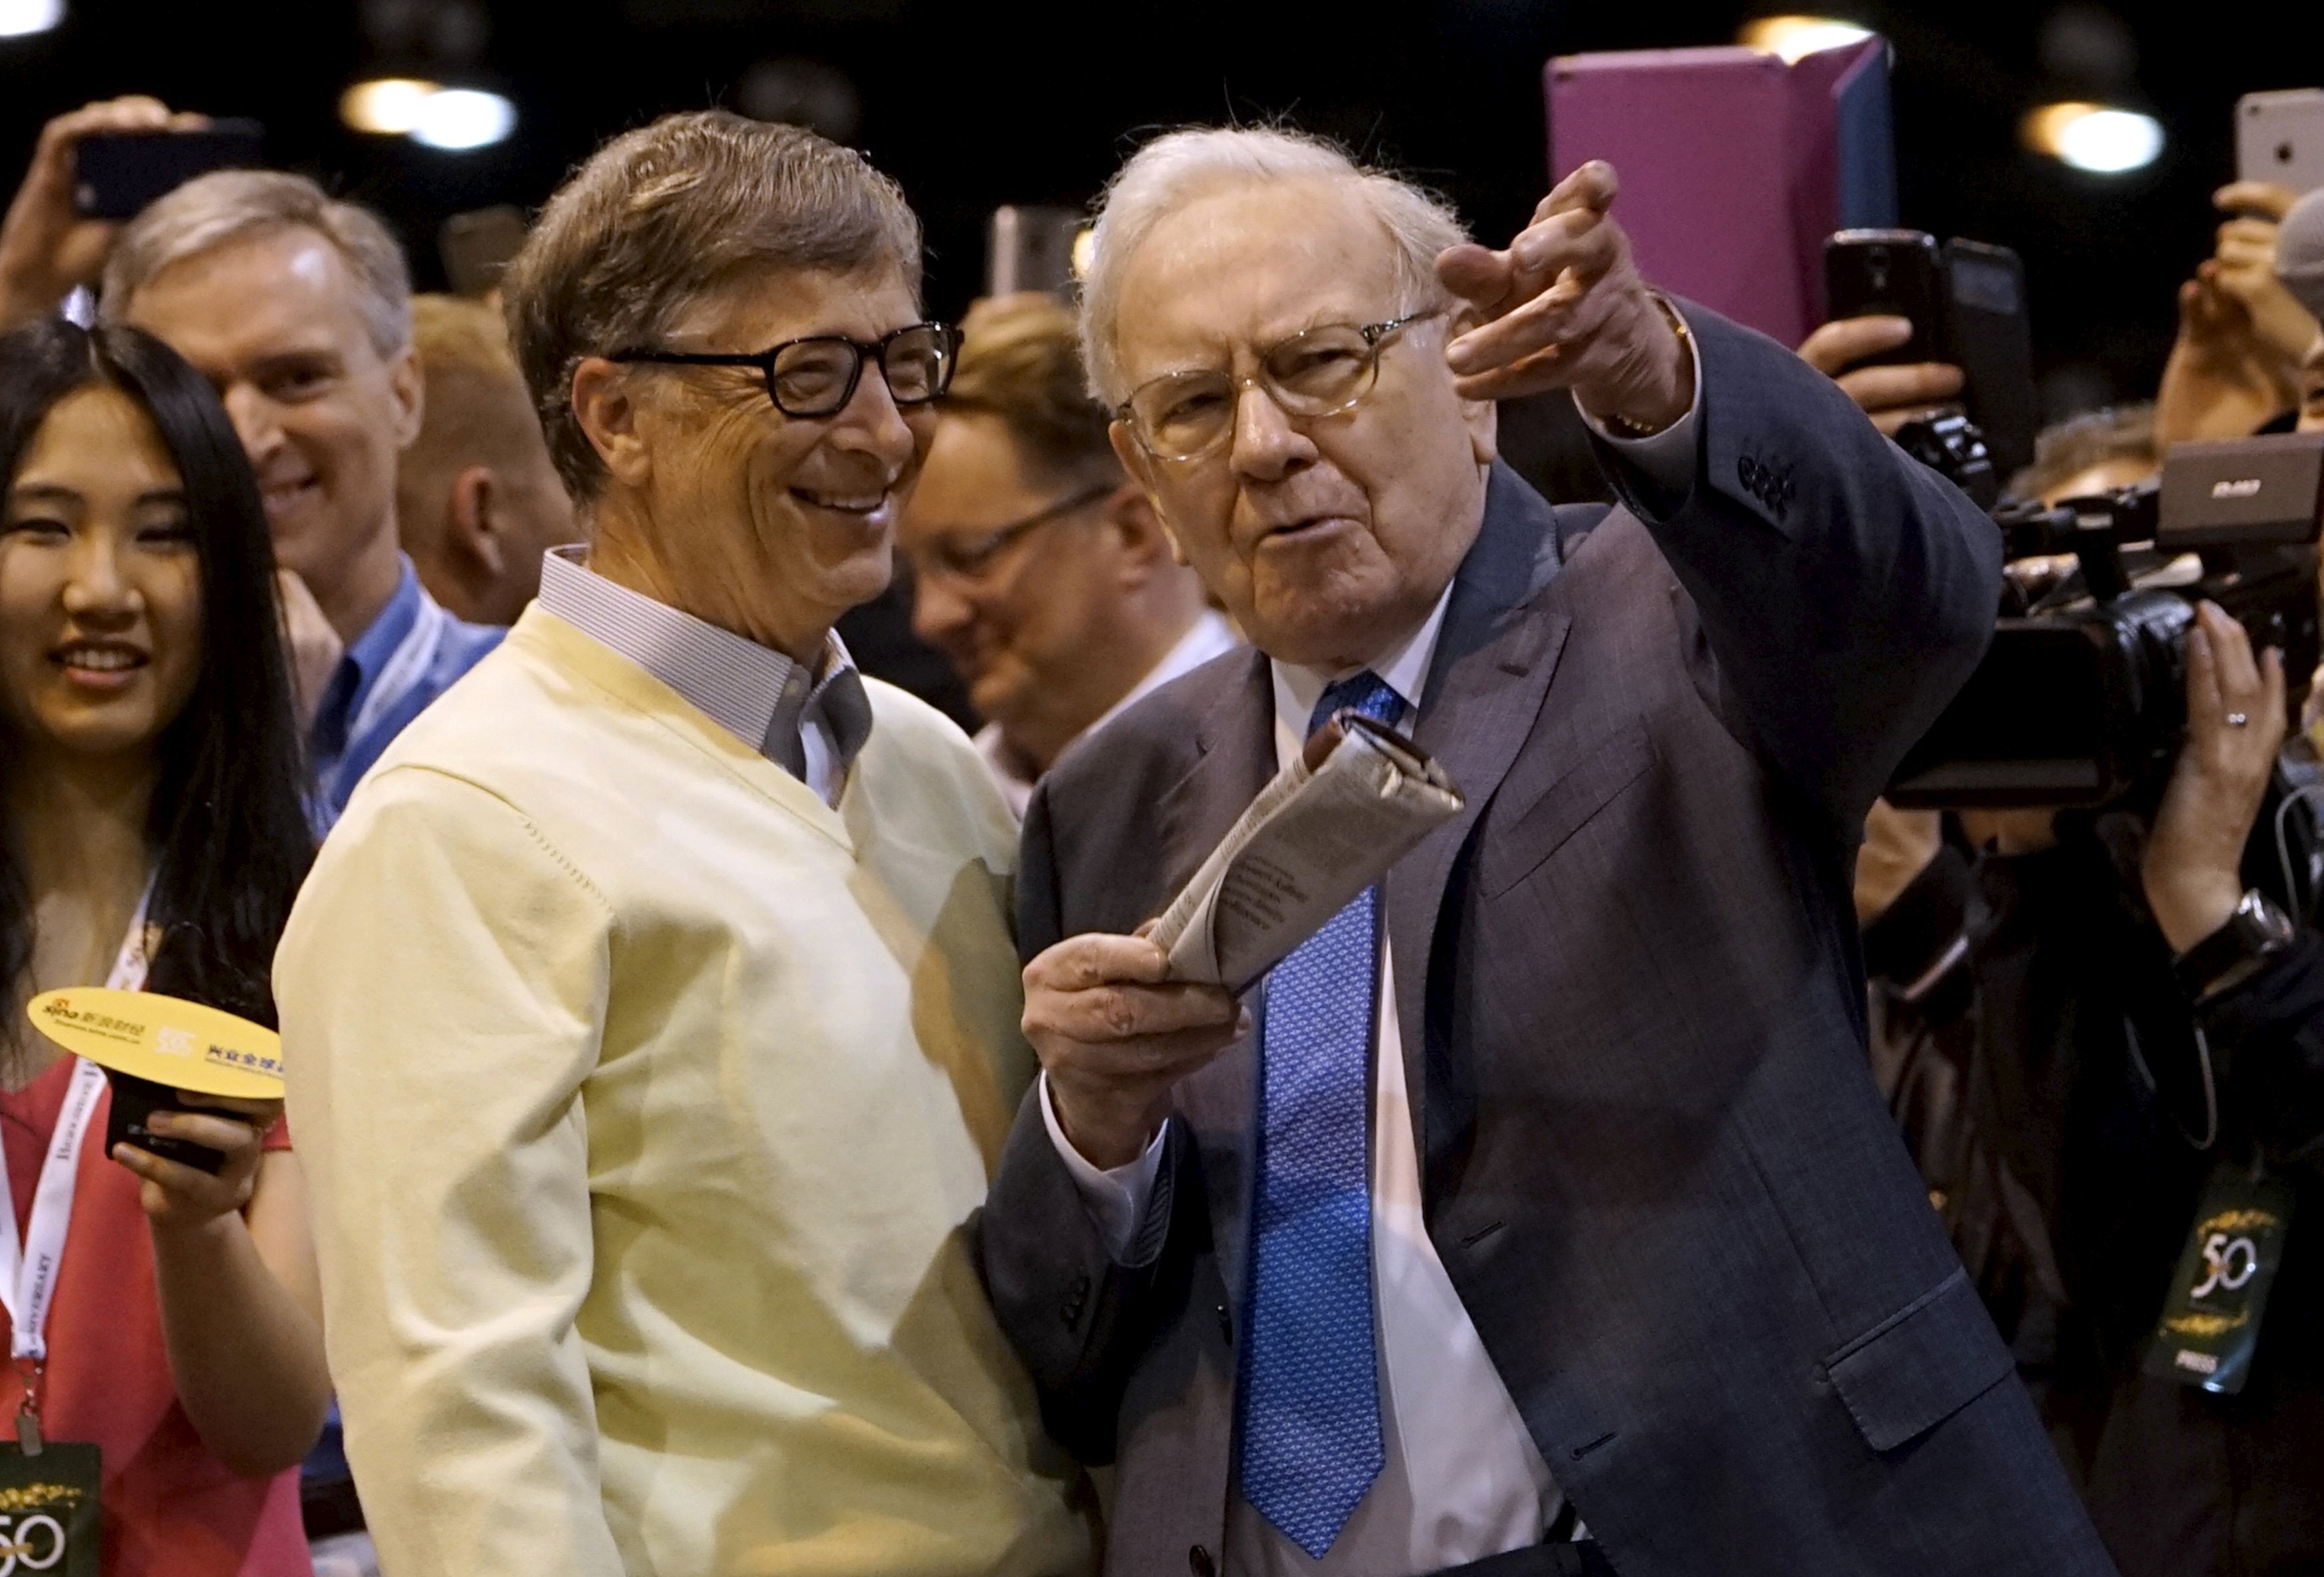 Bill Gates and Warren Buffet have been friends for more than 30 years